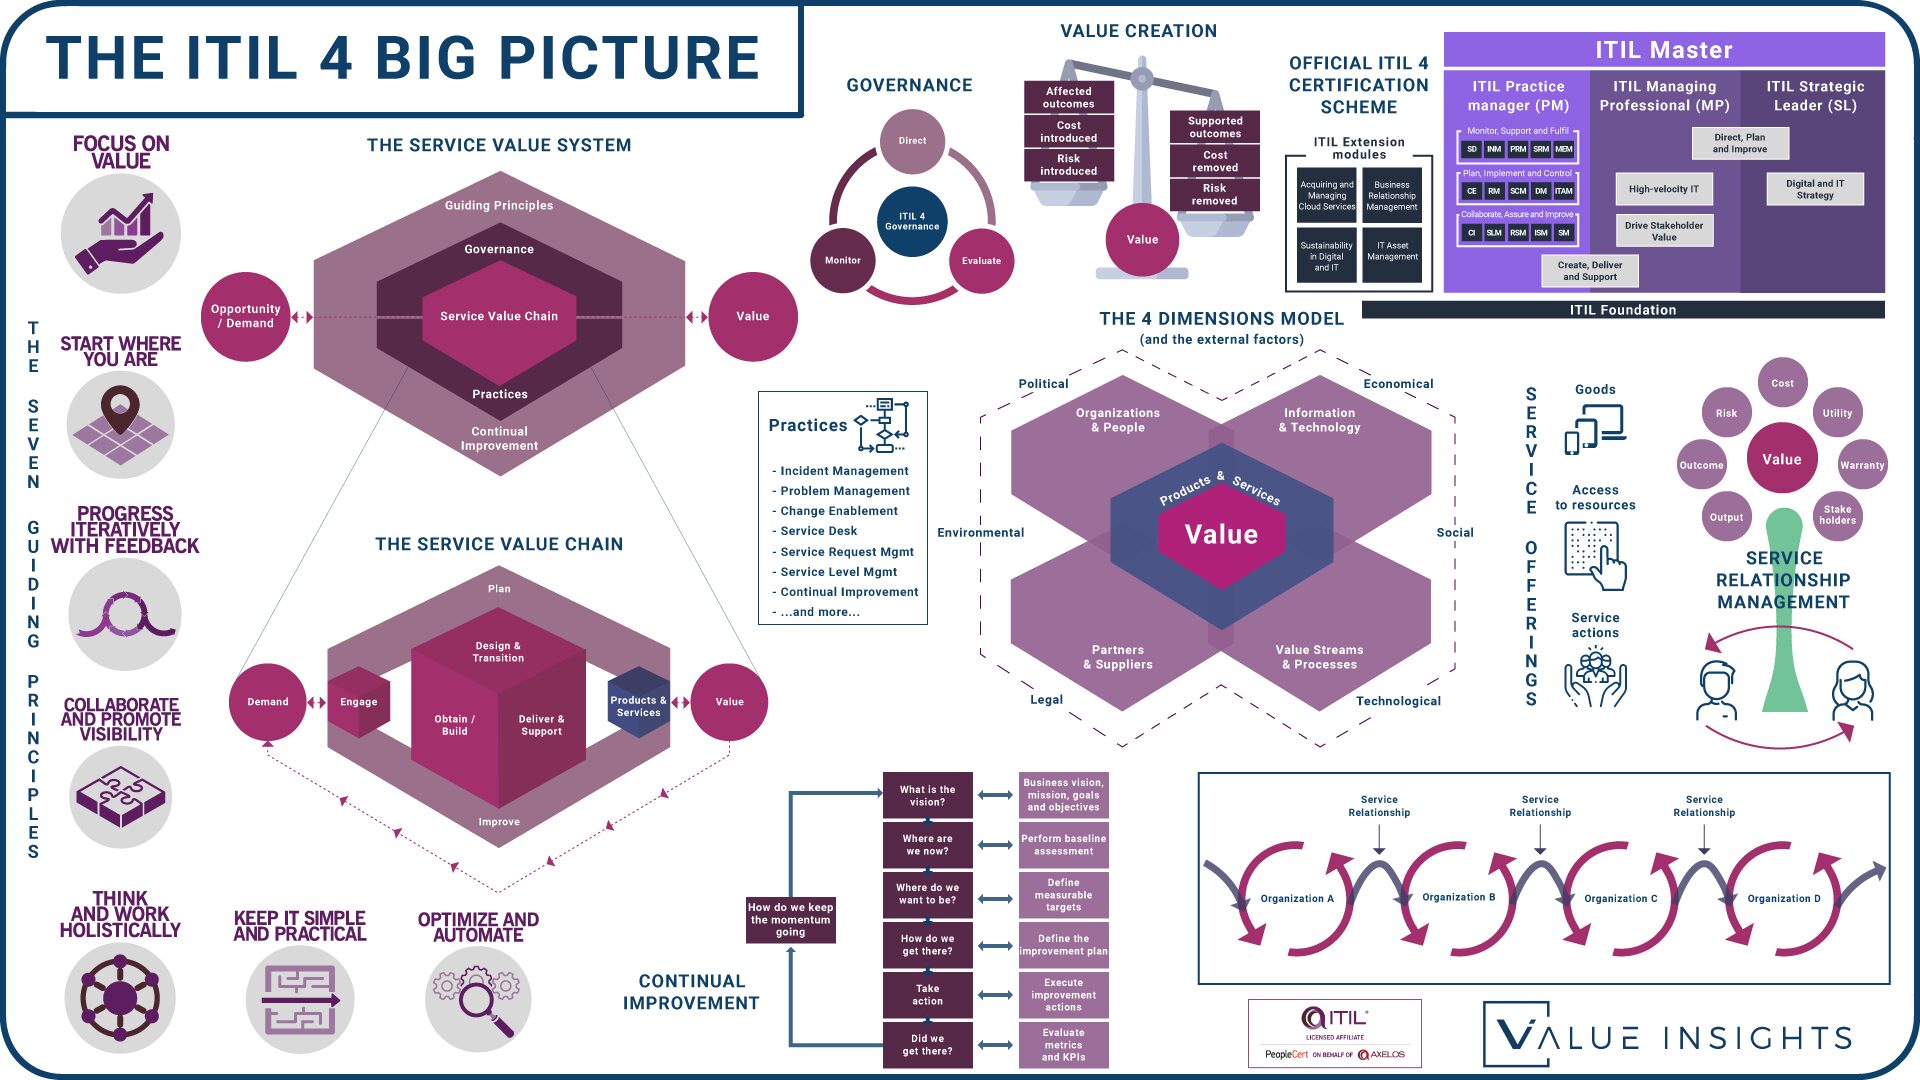 itil 4 big picture overview foundation create deliver support drive stakeholder value high velocity it direct plan and improve digital it strategy managing professional transition service management itsm badge png logo axelos peoplecert value insights